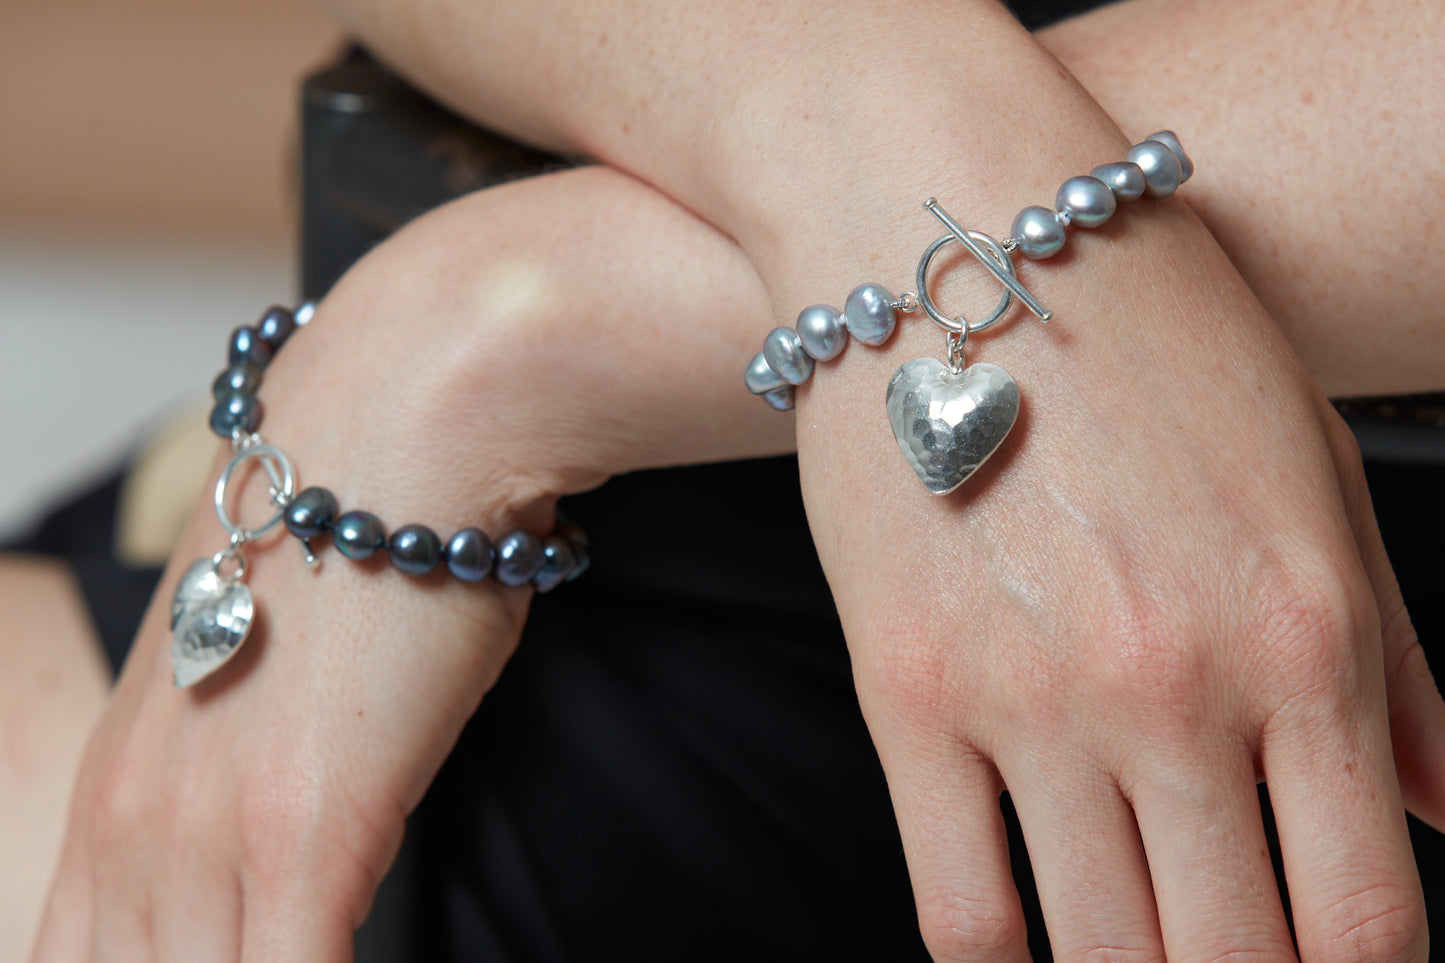 Amare black irregular cultured freshwater pearl bracelet with a silver hammered heart pendant